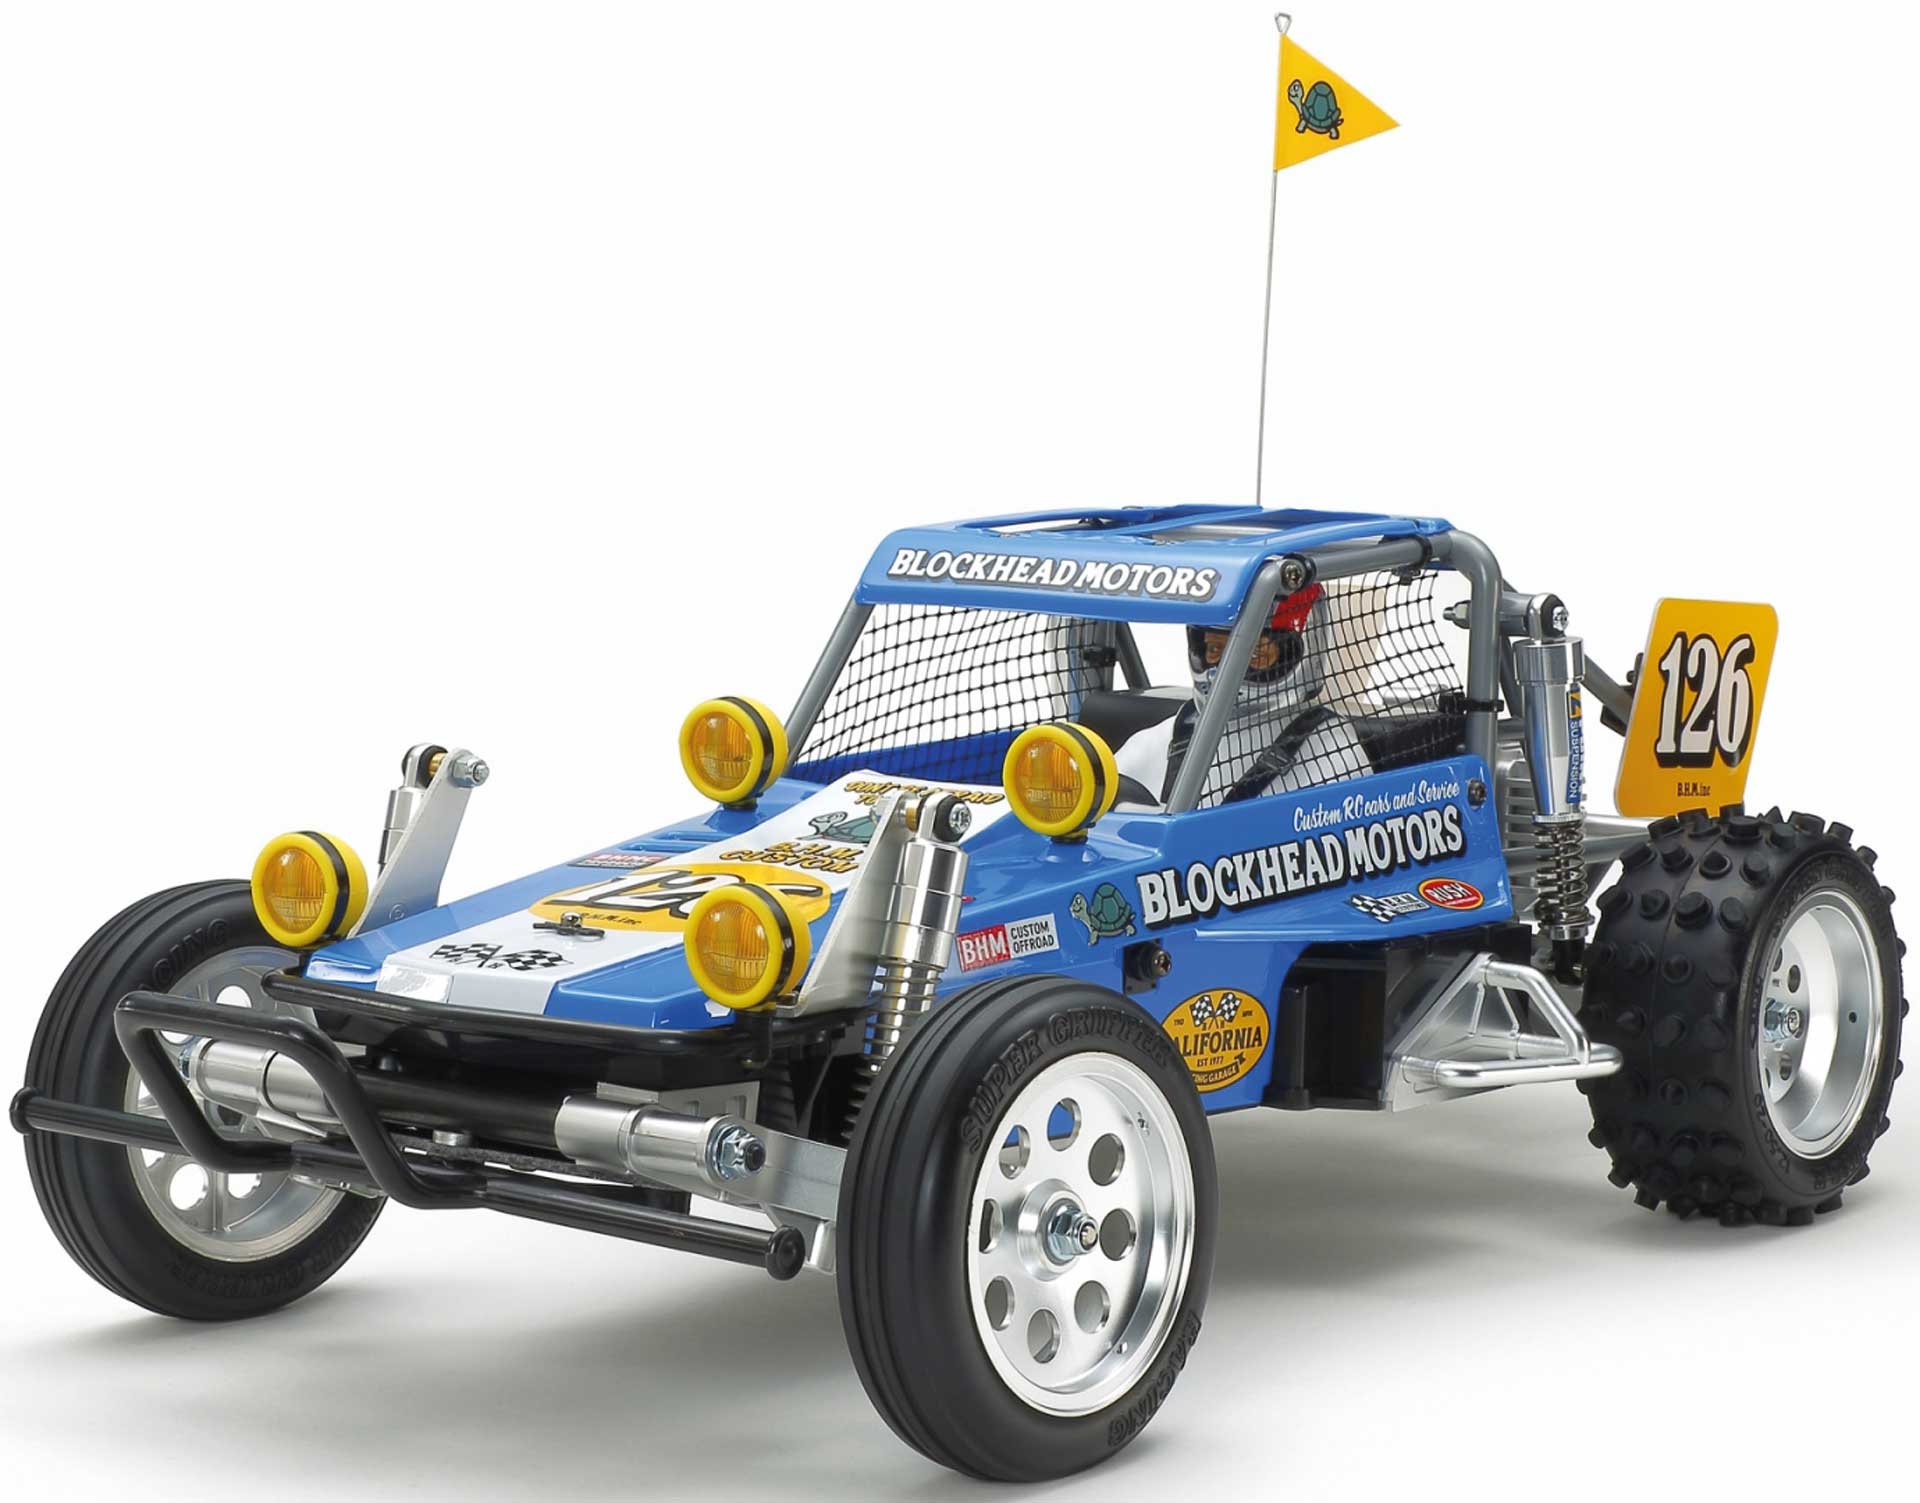 TAMIYA Wild One OR Blockhead Motors Buggy Scale 1/10 2WD drive electric